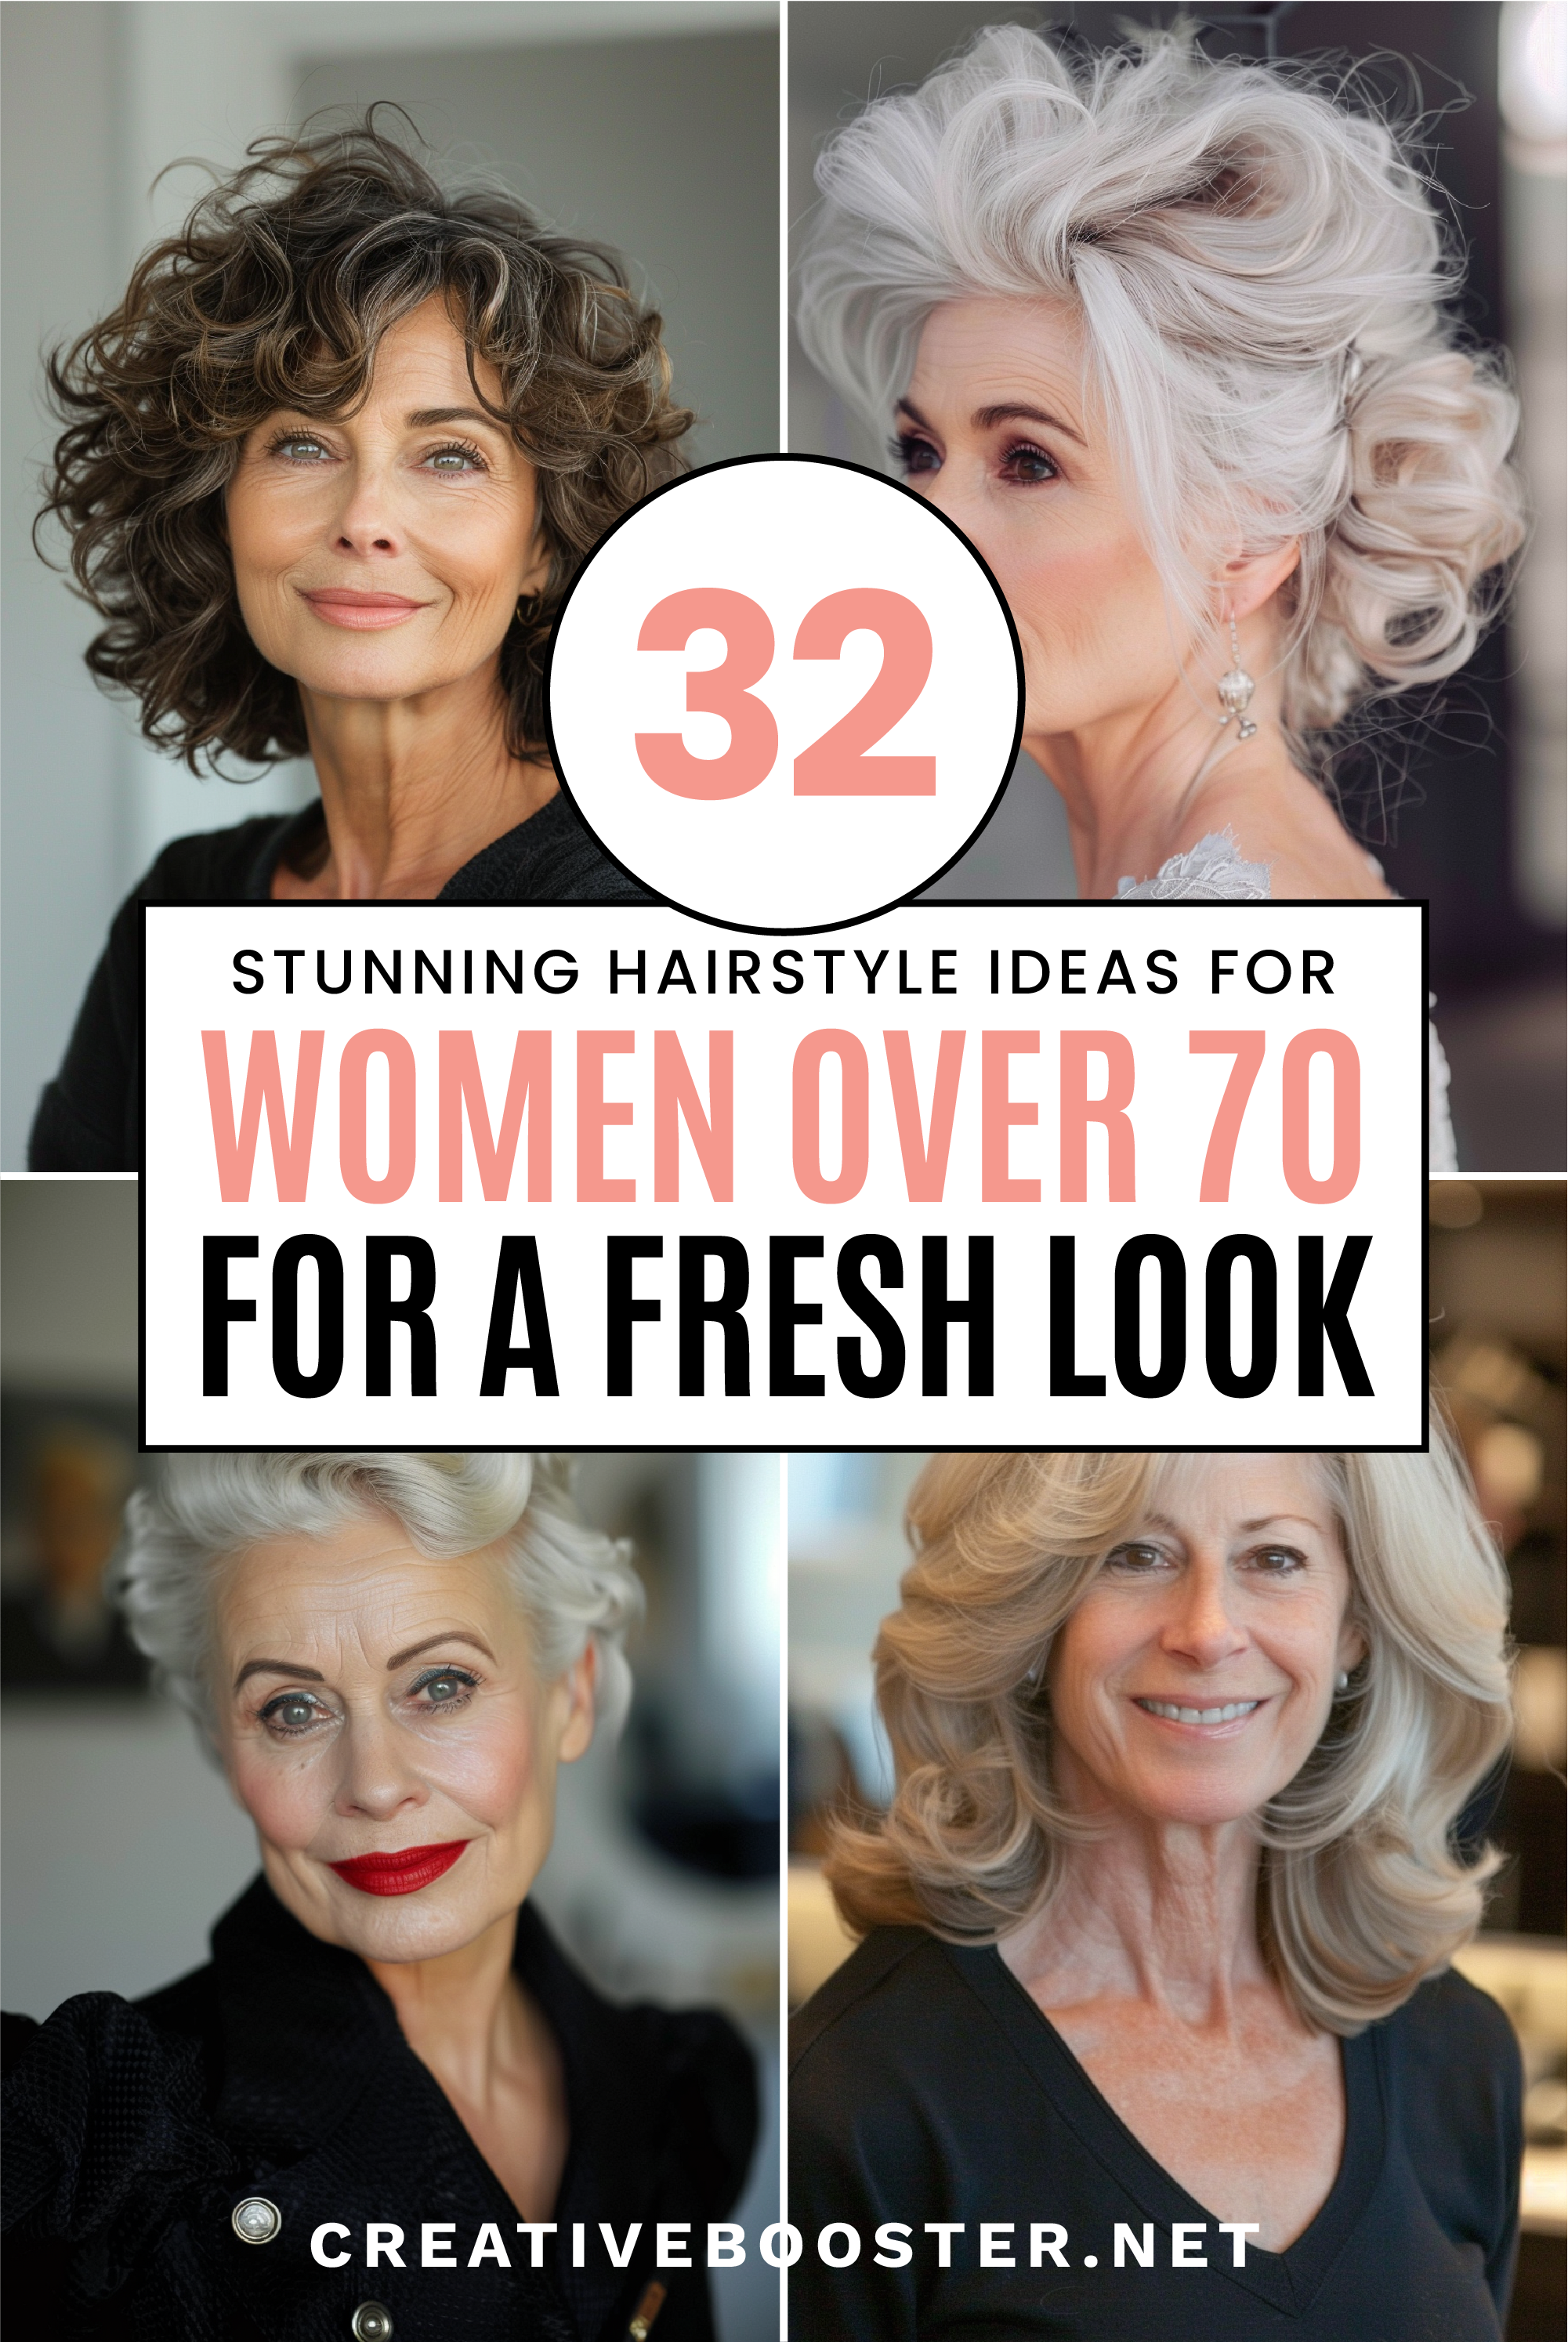 Hairstyles-for-Women-Over-70 Tall 6